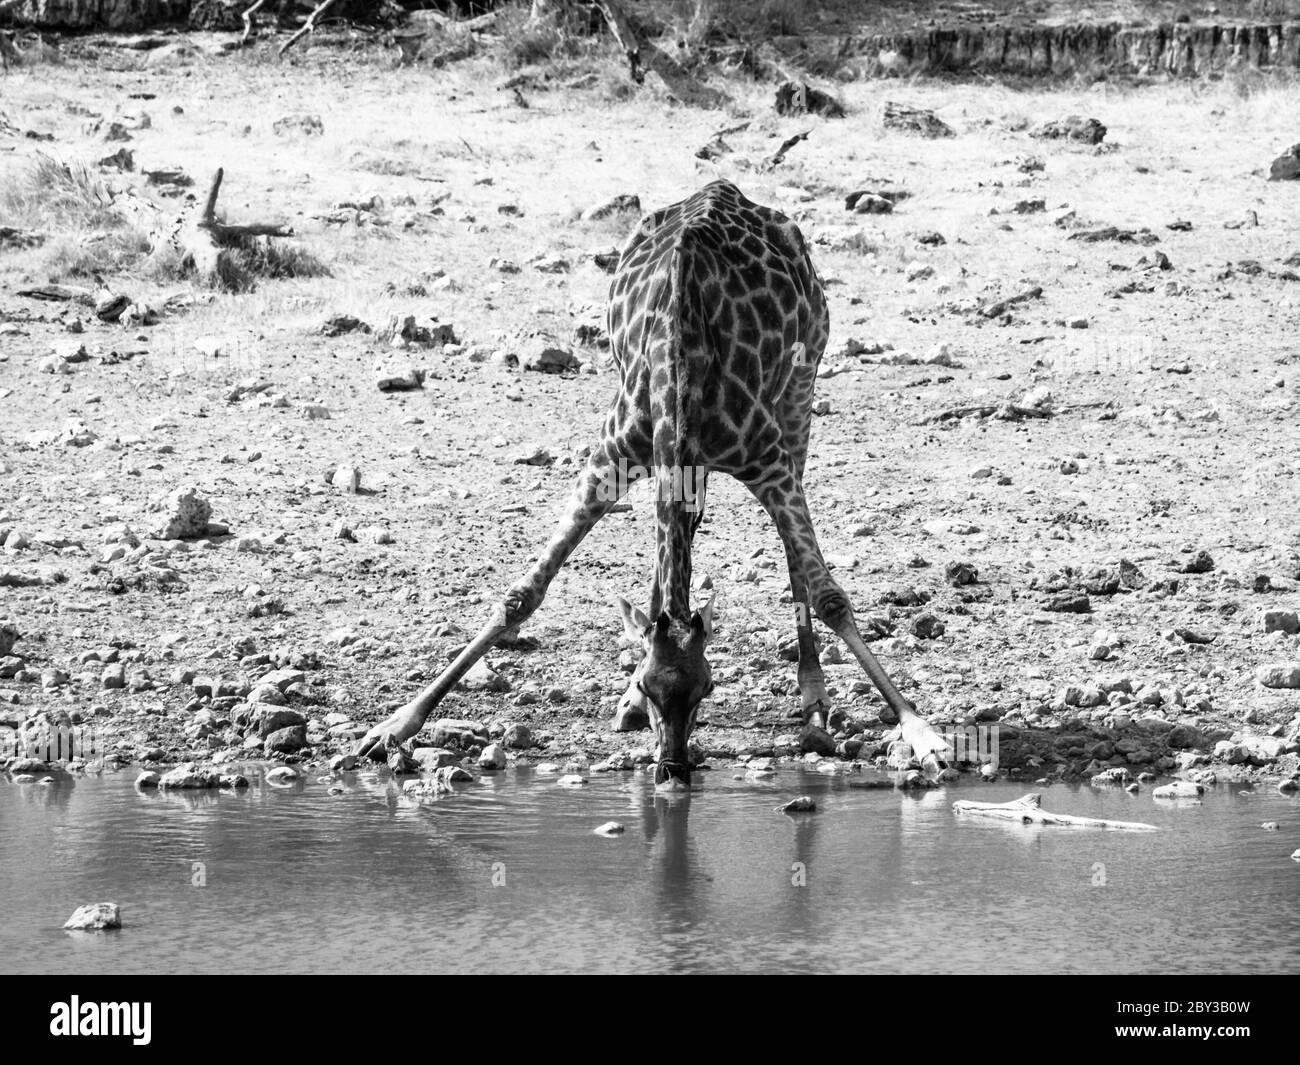 Thirsty giraffe drinking from waterhole in typical pose with wide spread legs, Etosha National Park, Namibia. Black and white image. Stock Photo